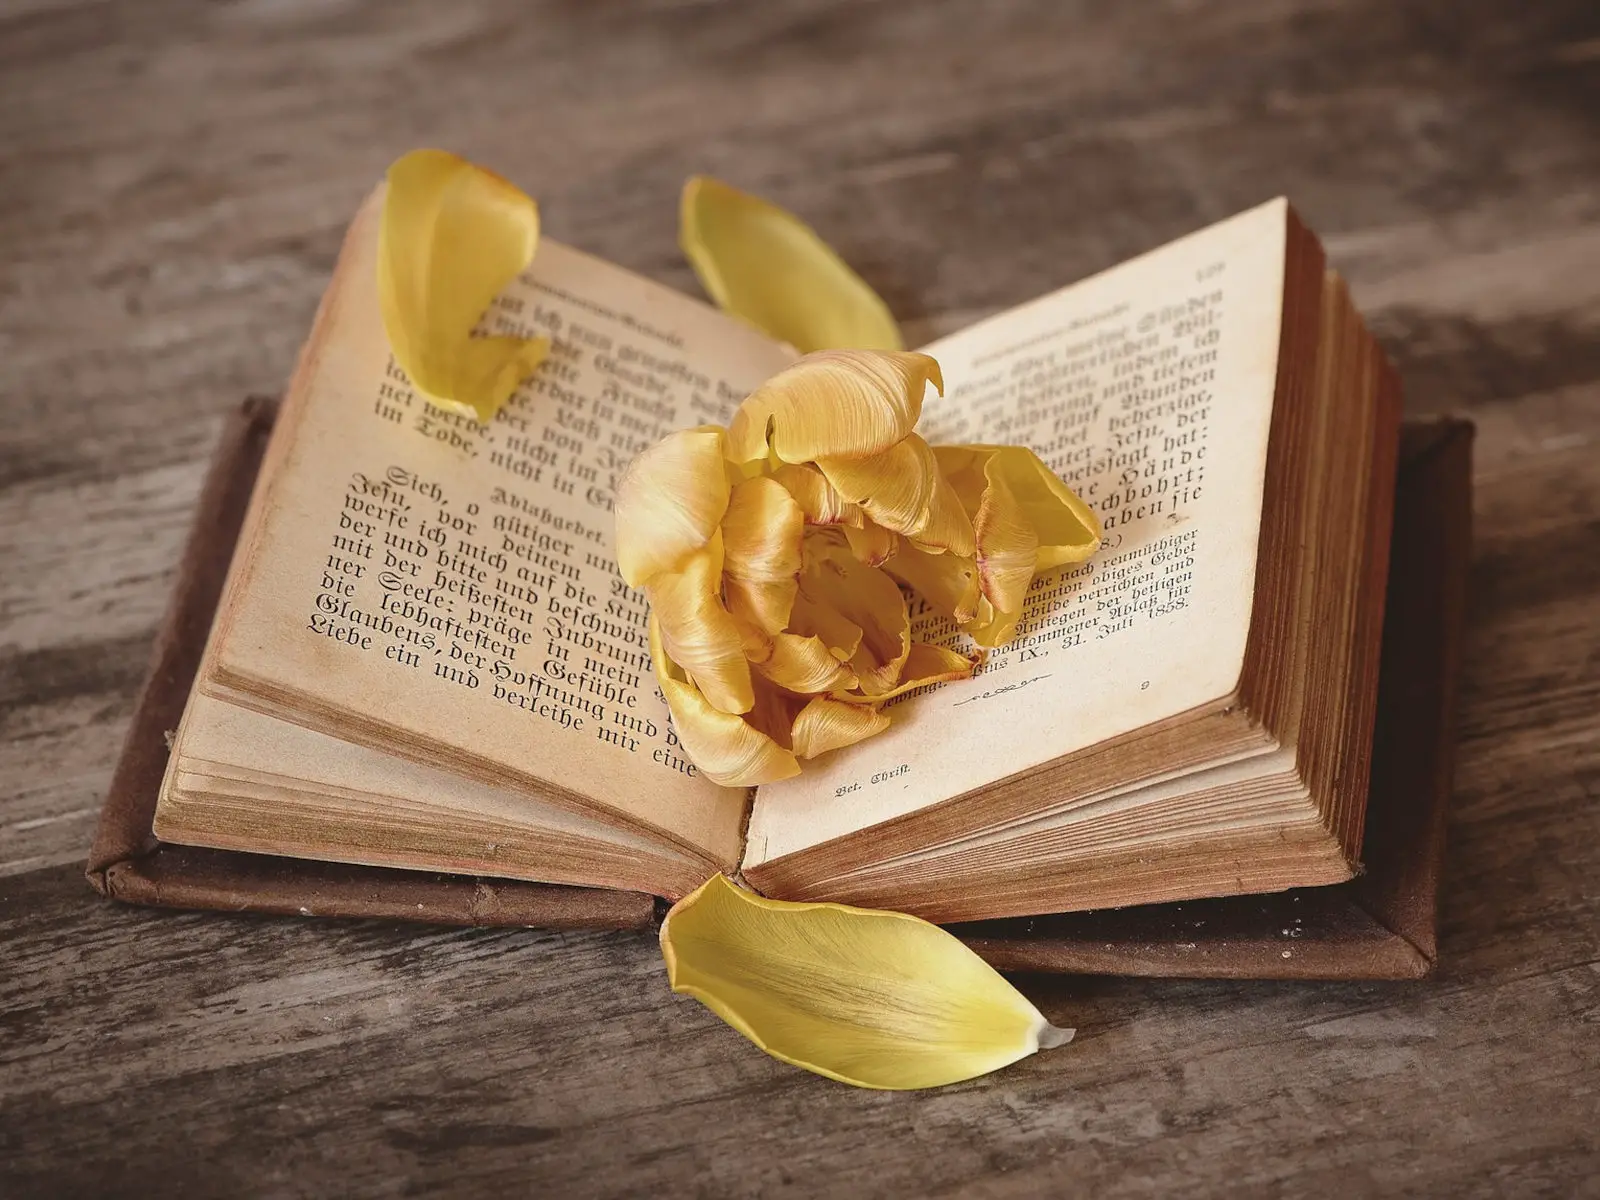 old book that is open with flower petals in it